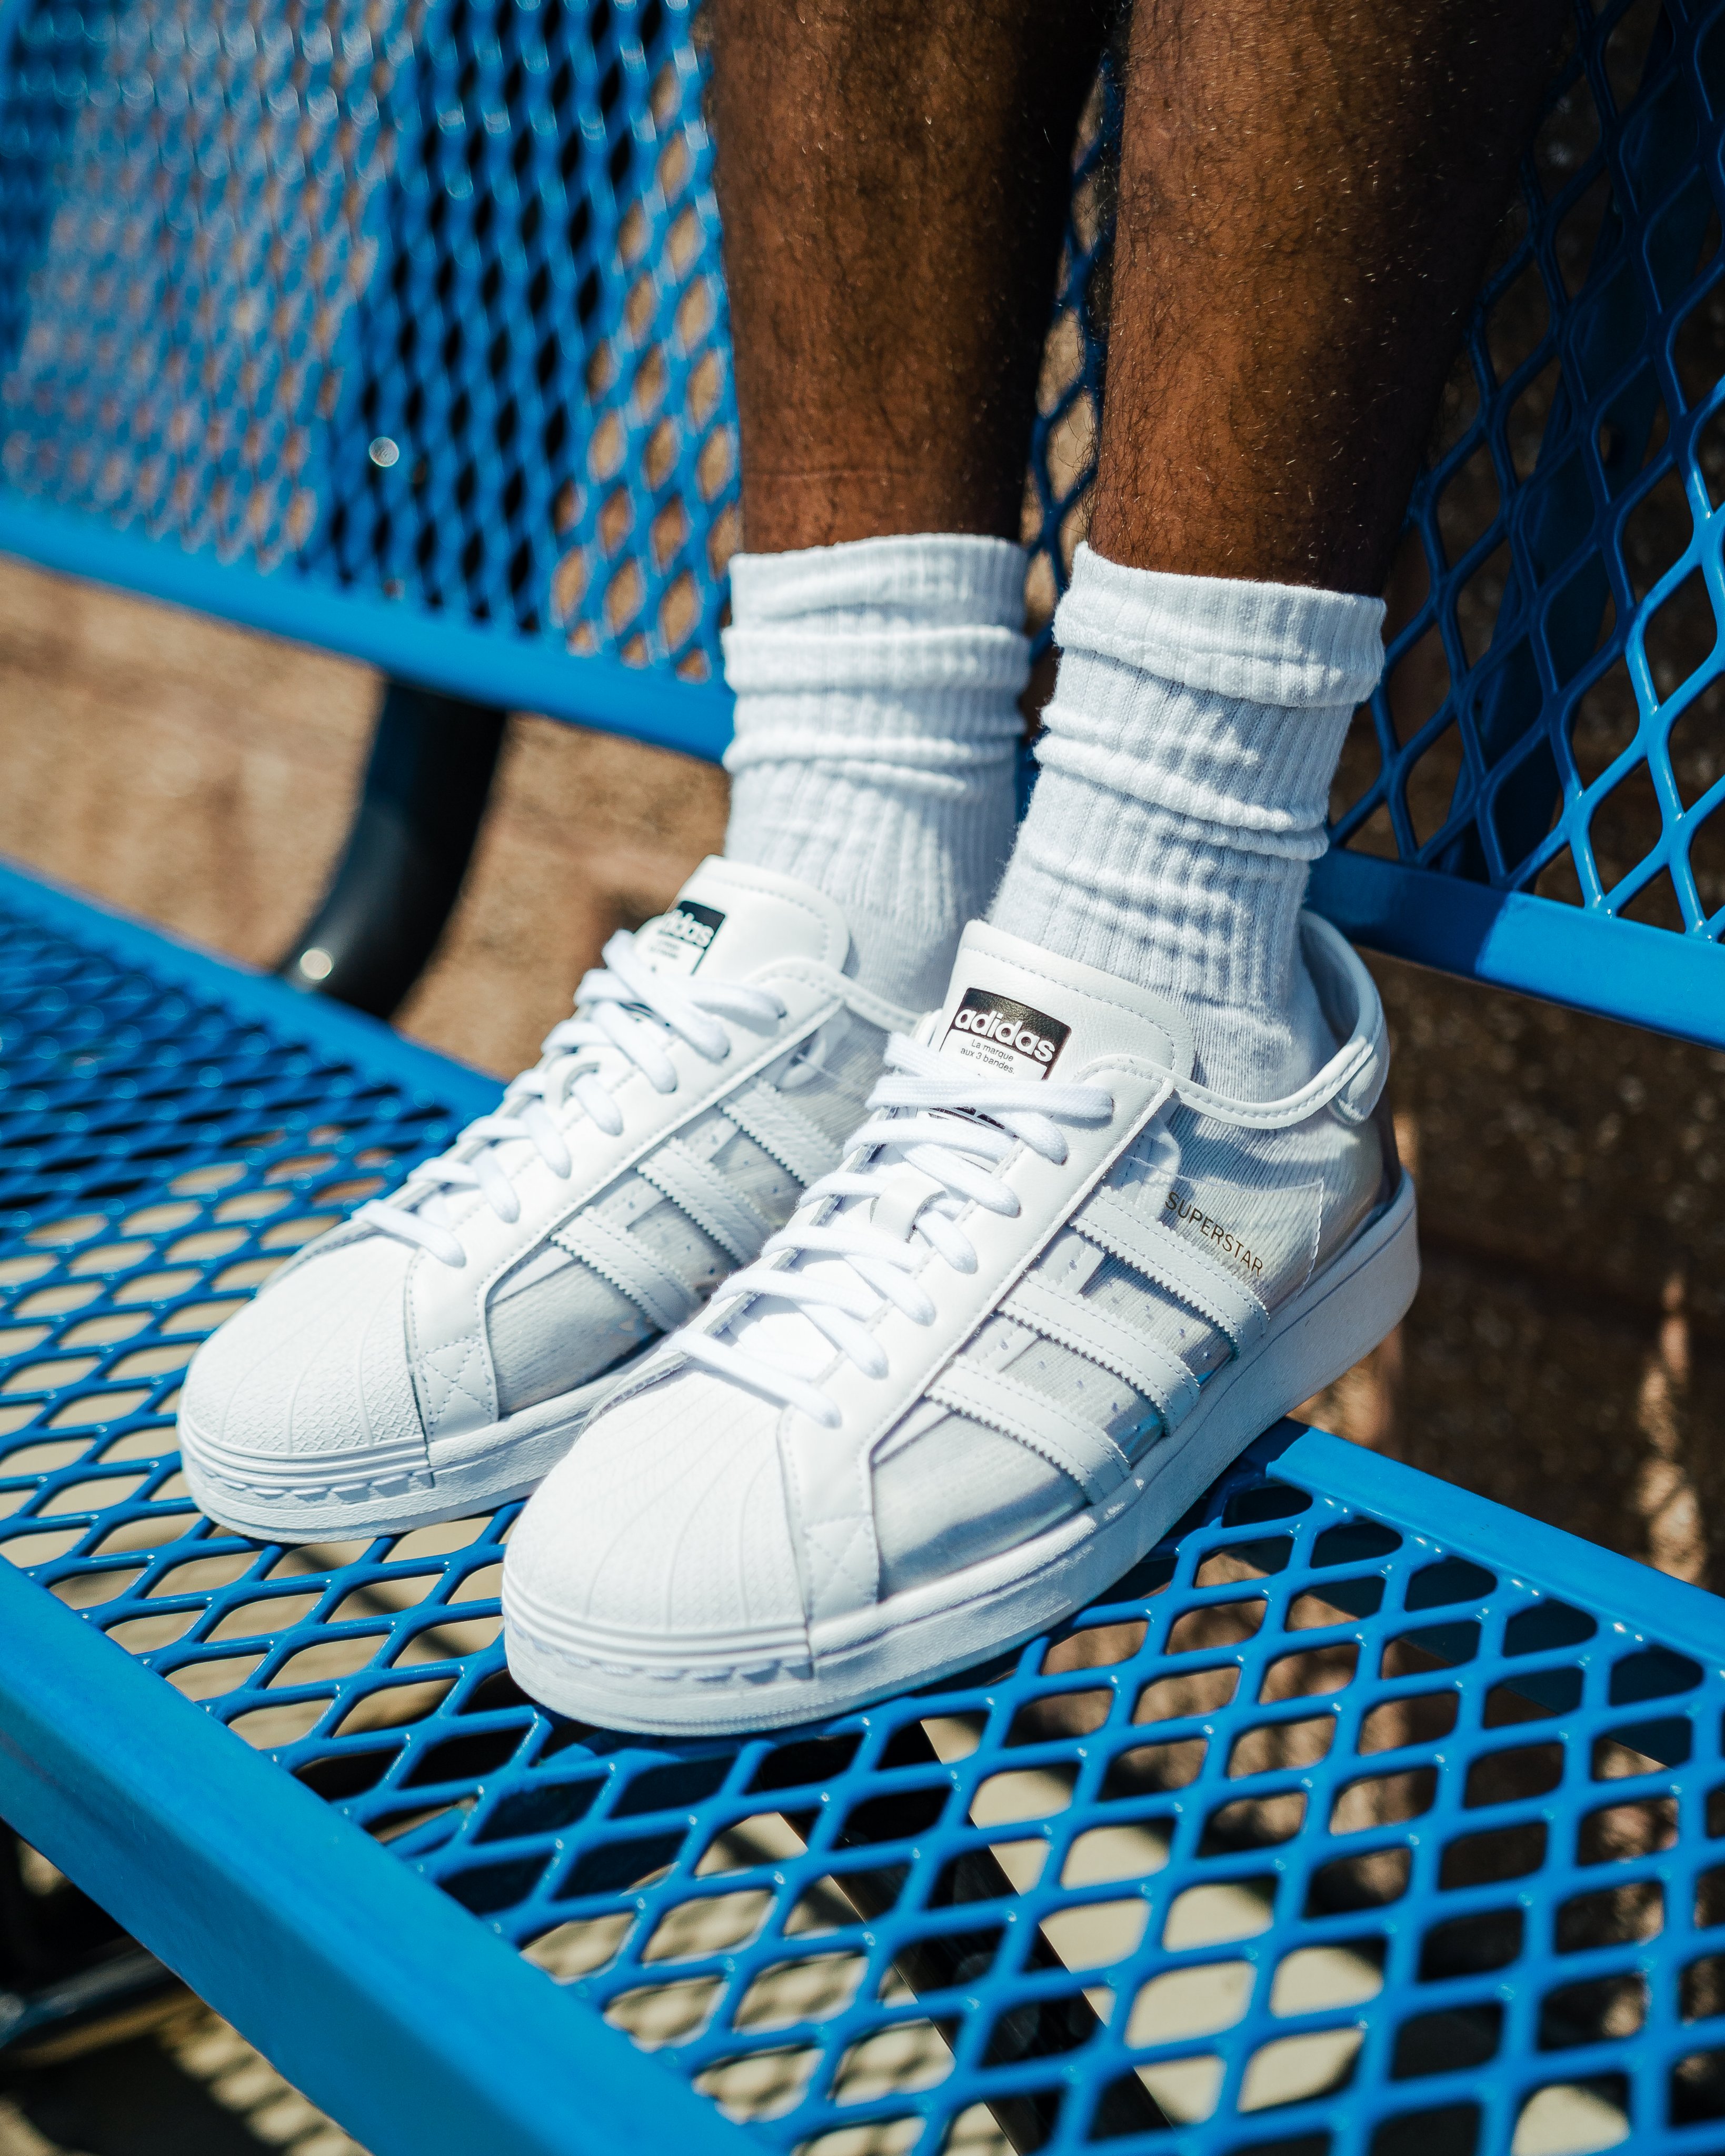 Bekend Retentie Ongewapend Footaction on Twitter: "See-Through Superstar. Shop the #adidas Transparent  Superstar now. https://t.co/4IHTpaYyXY https://t.co/ARsM3VemX6" / Twitter